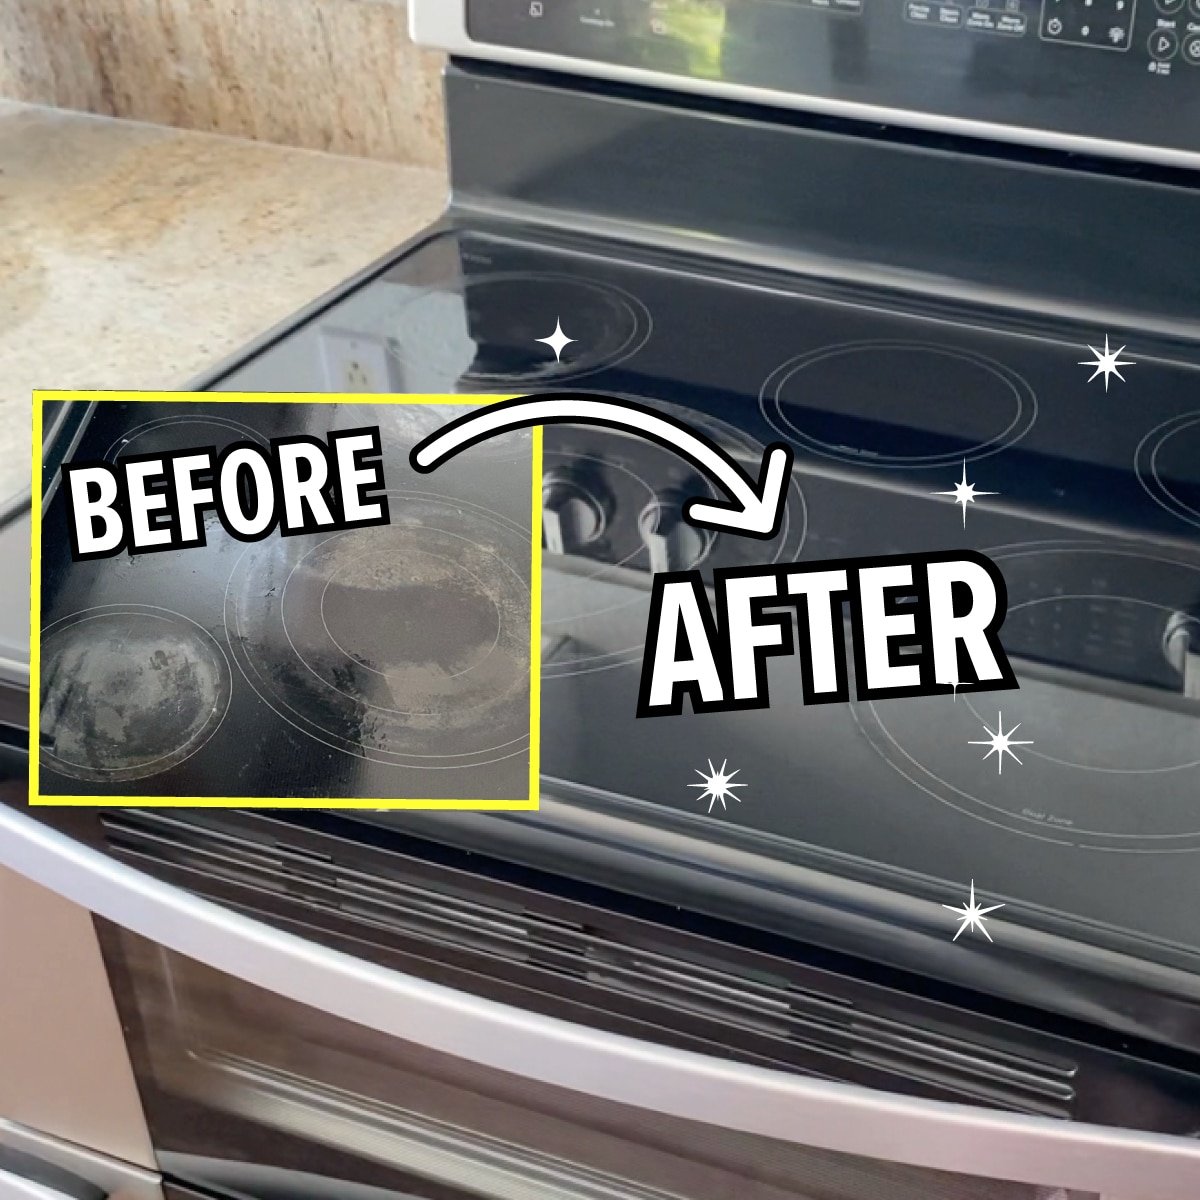 Before and after photos showing dirty then clean flat glass stovetop.